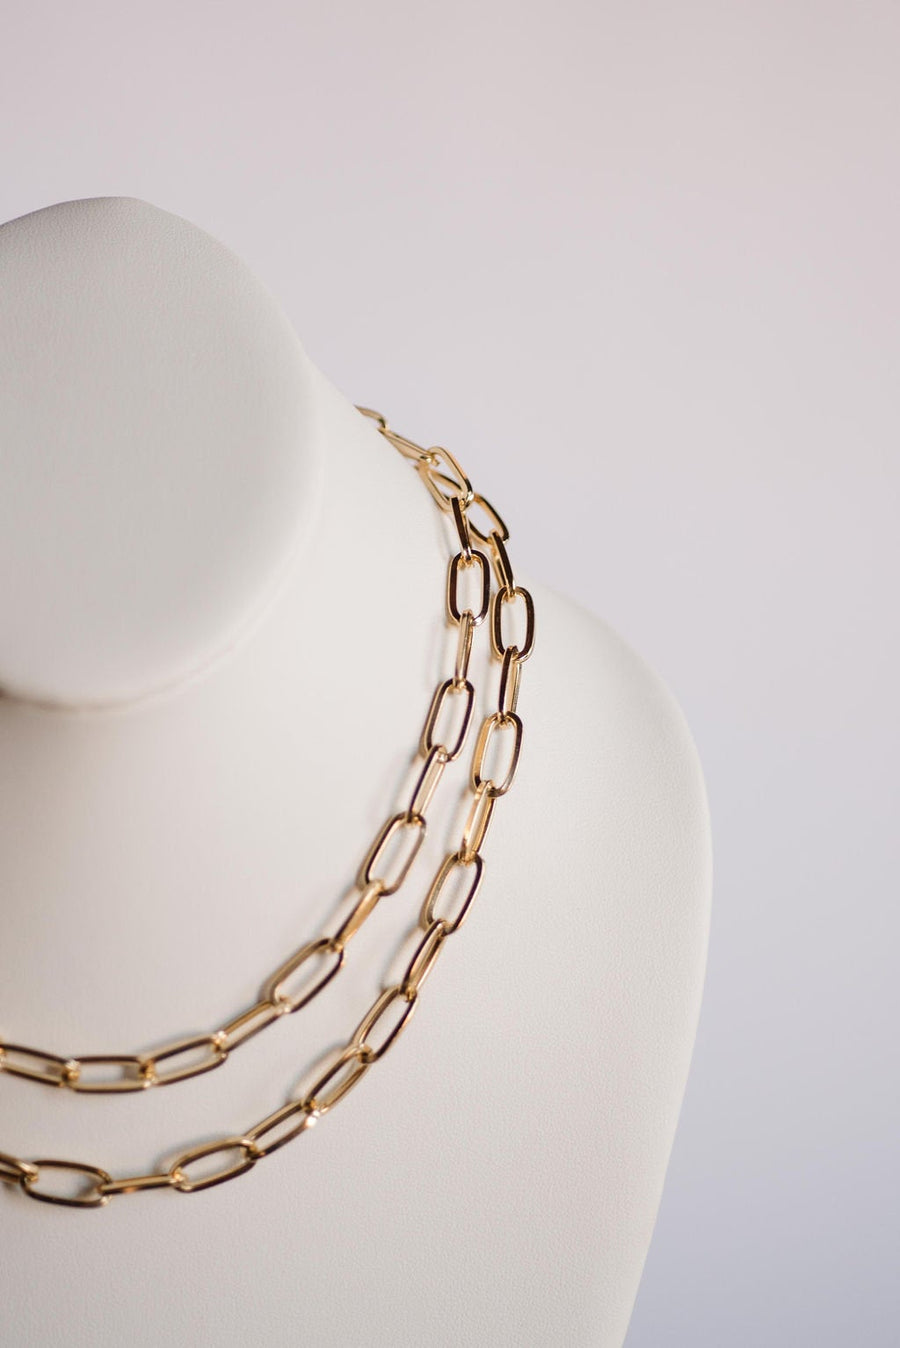 Large Link Chain, 18k Gold Filled Chain, Paperclip Chain, Gold Chain, Gold Jewelry, Necklace, Choker, Layering Jewelry, Christmas Gift, XXL